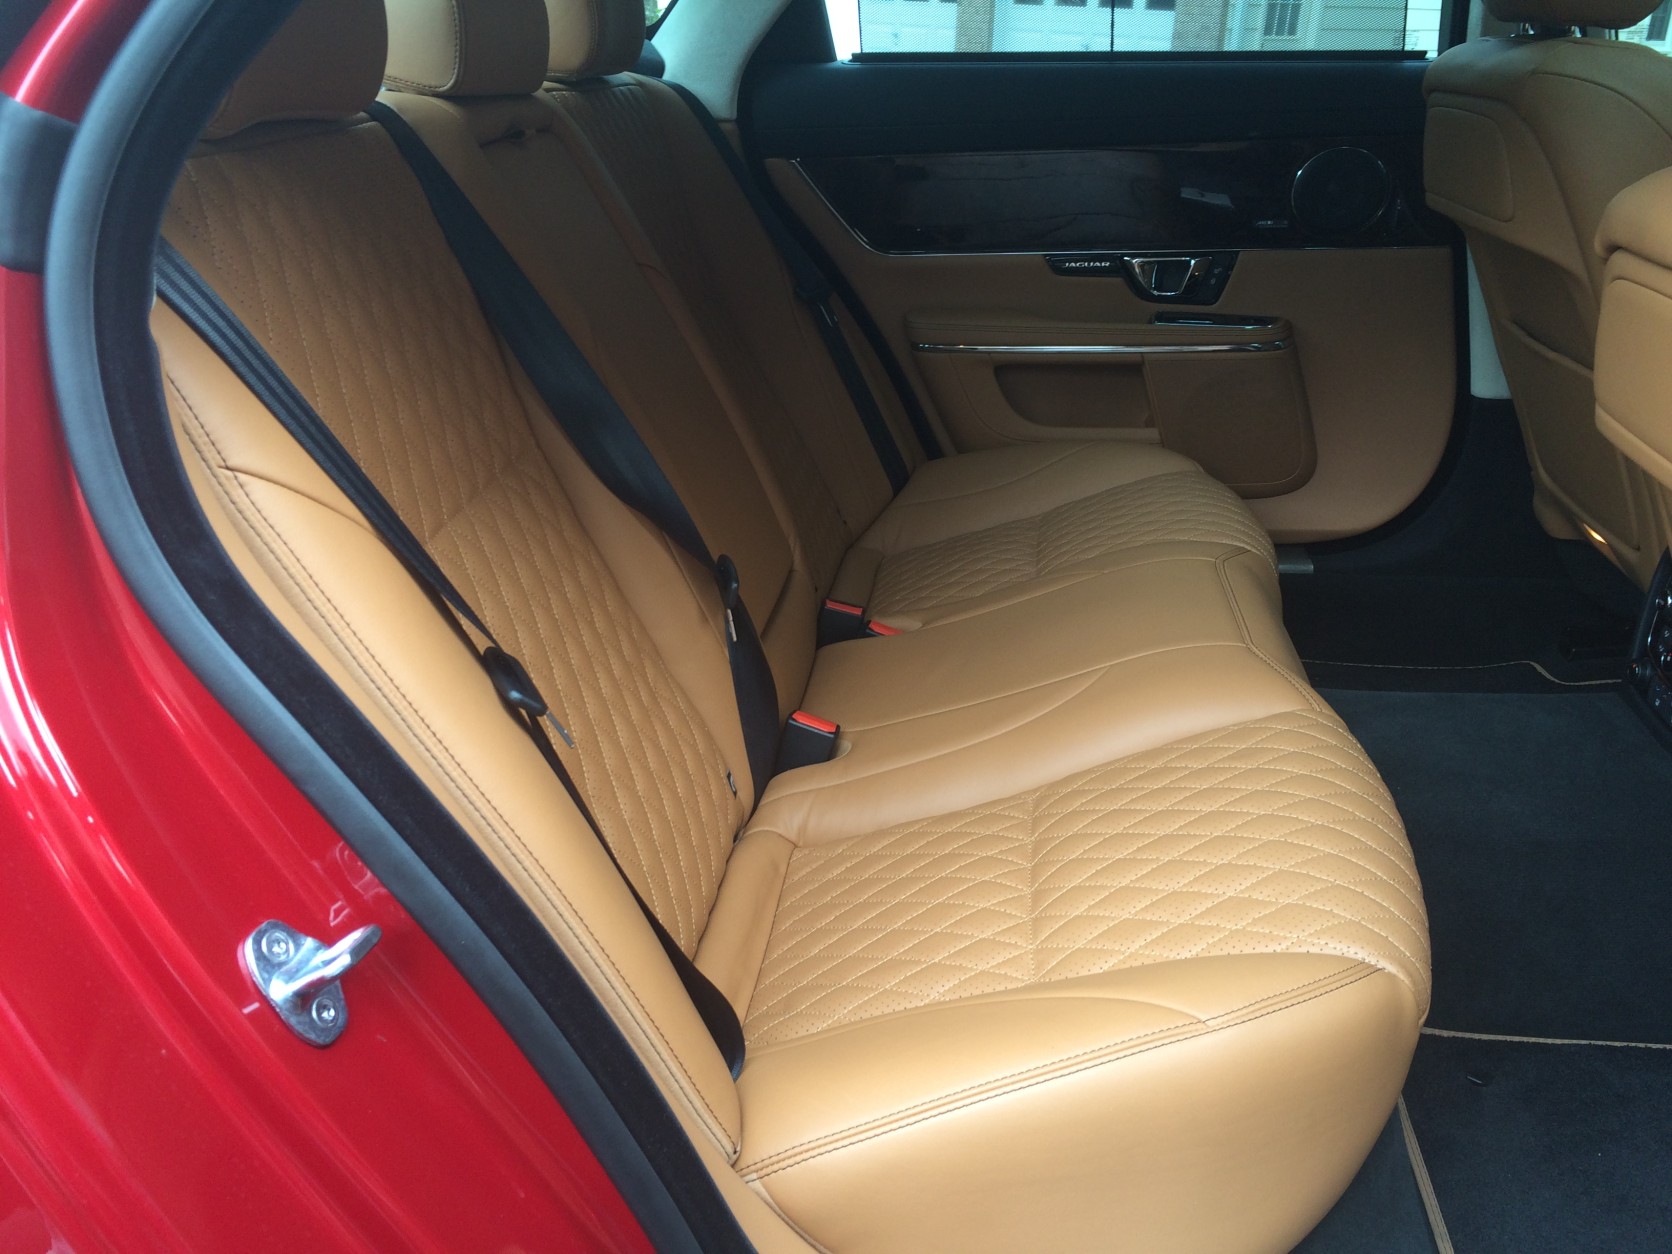 One thing the 2016 Jaguar XJL Portfolio fixes is rear seat leg room. Compared to the normal XJ, it adds an extra five inches or so. (WTOP/Mike Parris)